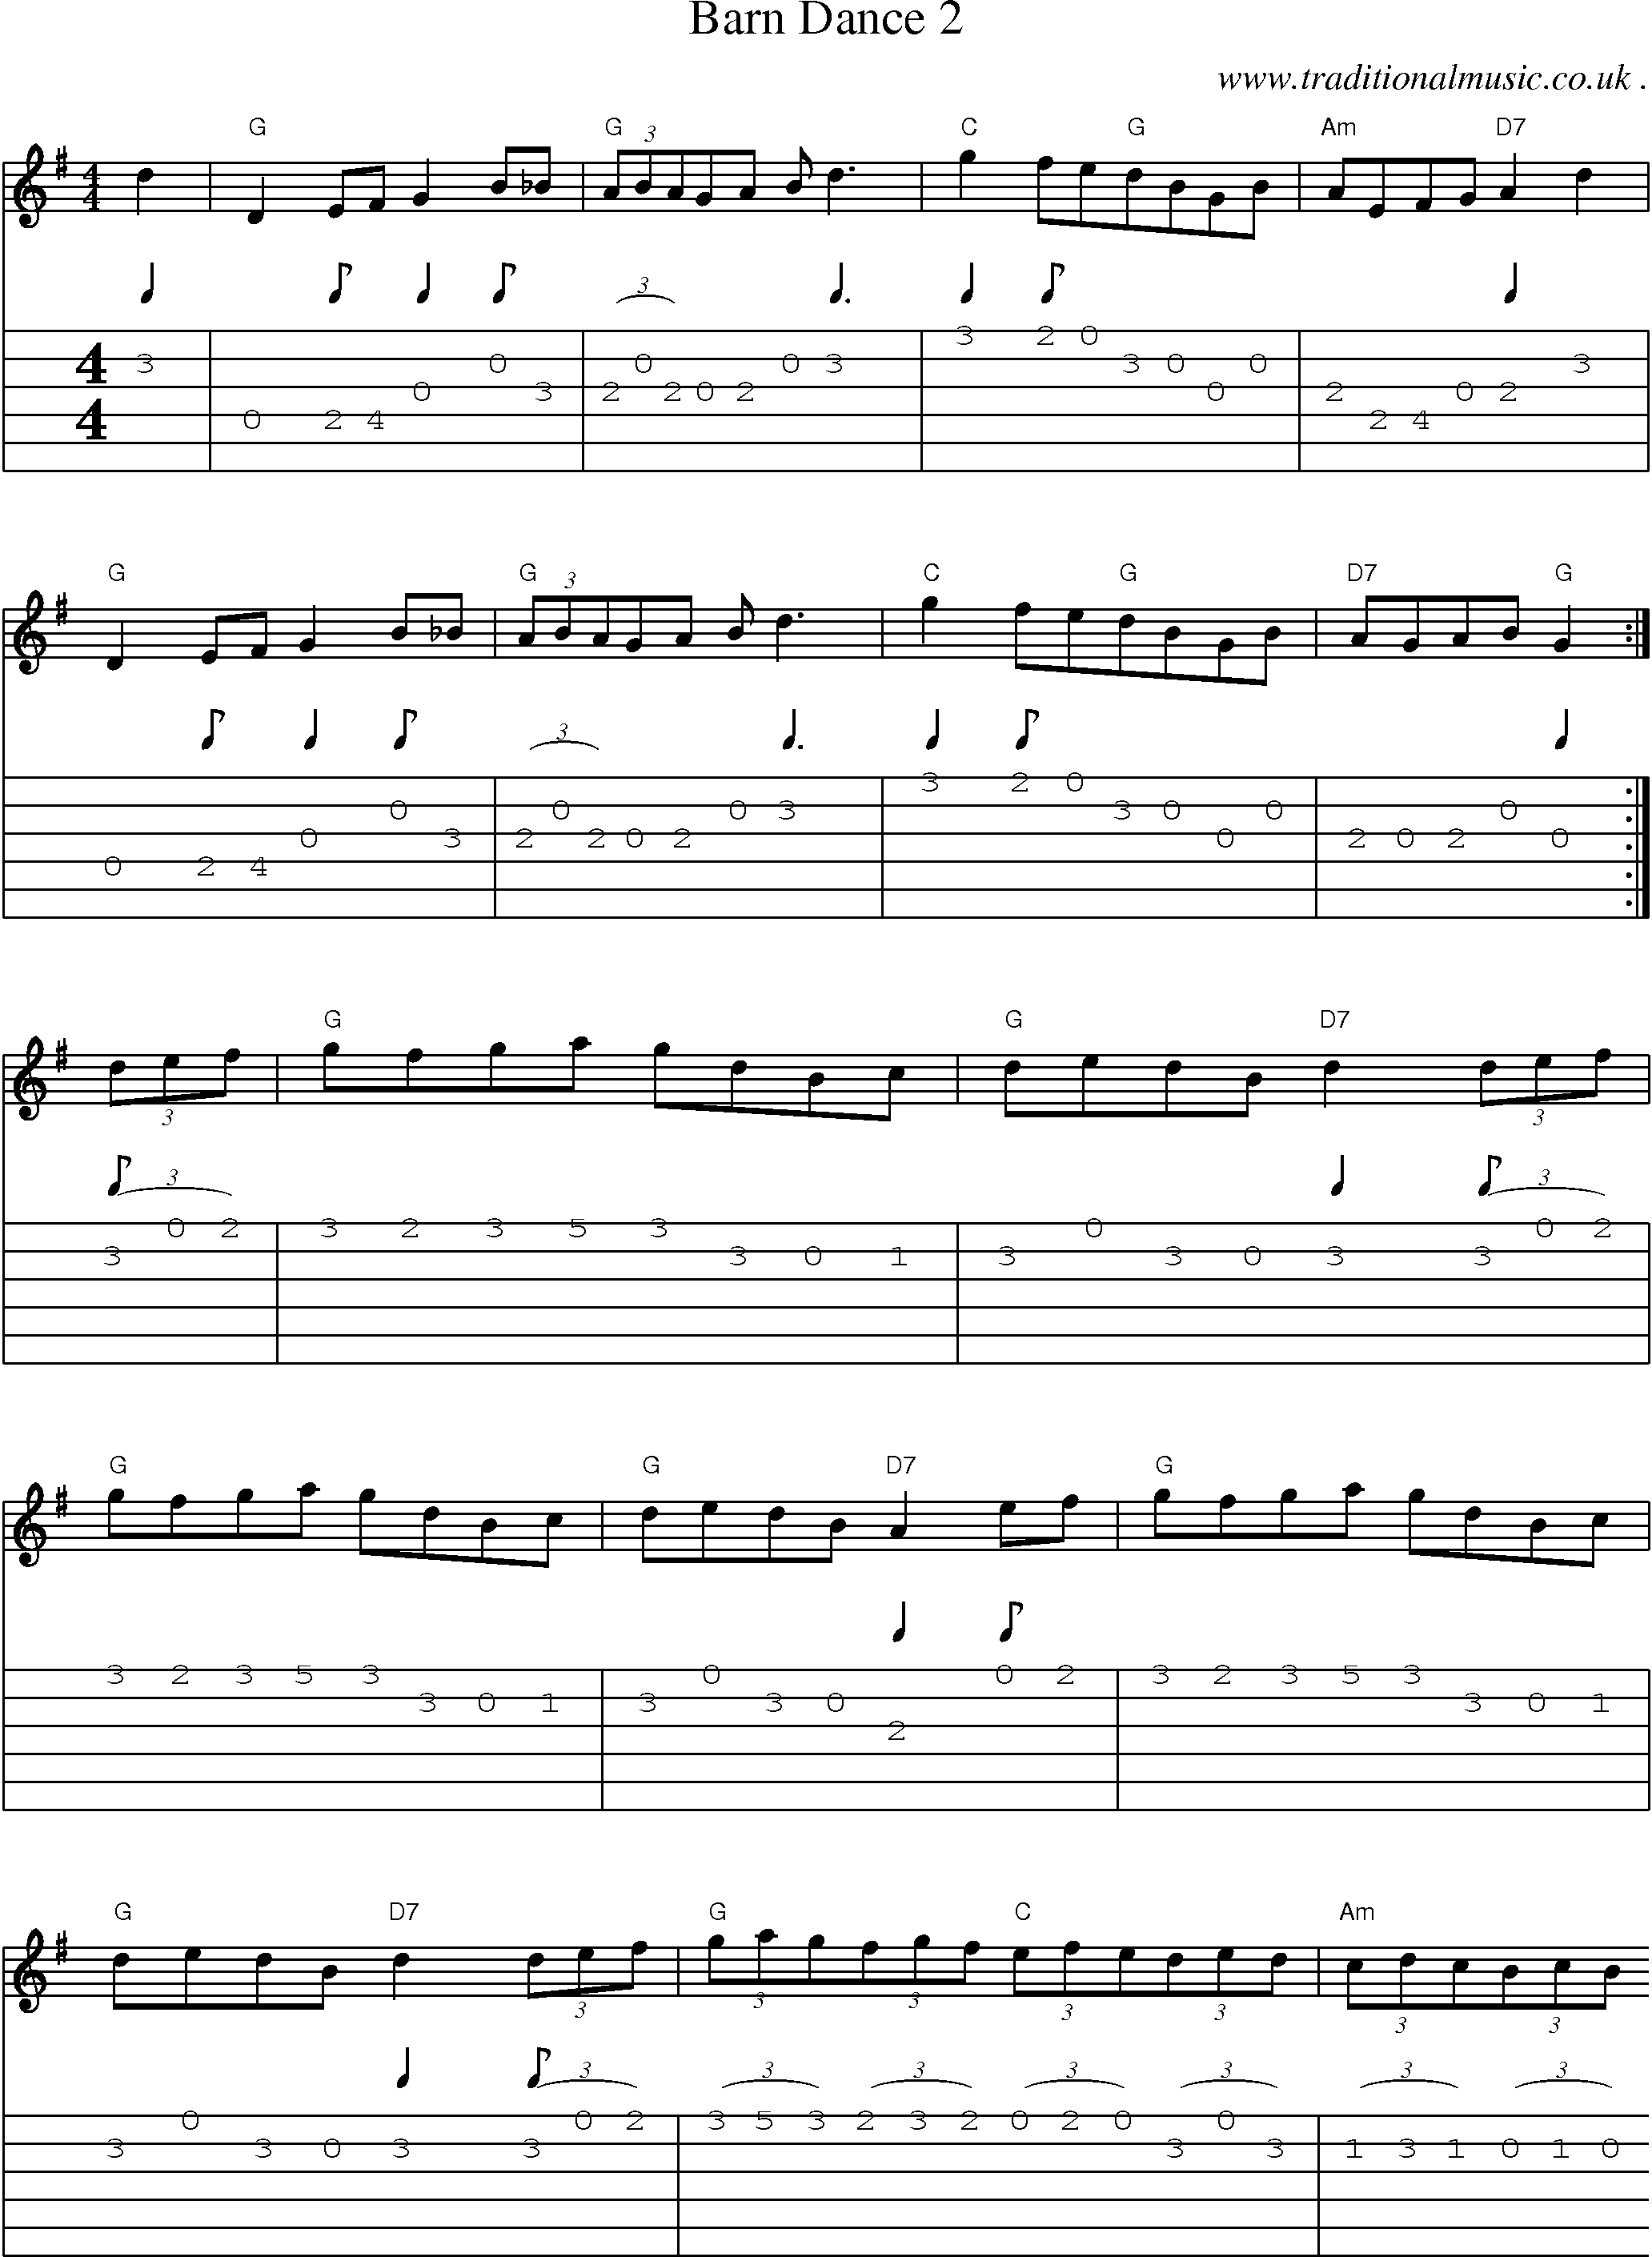 Sheet-Music and Guitar Tabs for Barn Dance 2